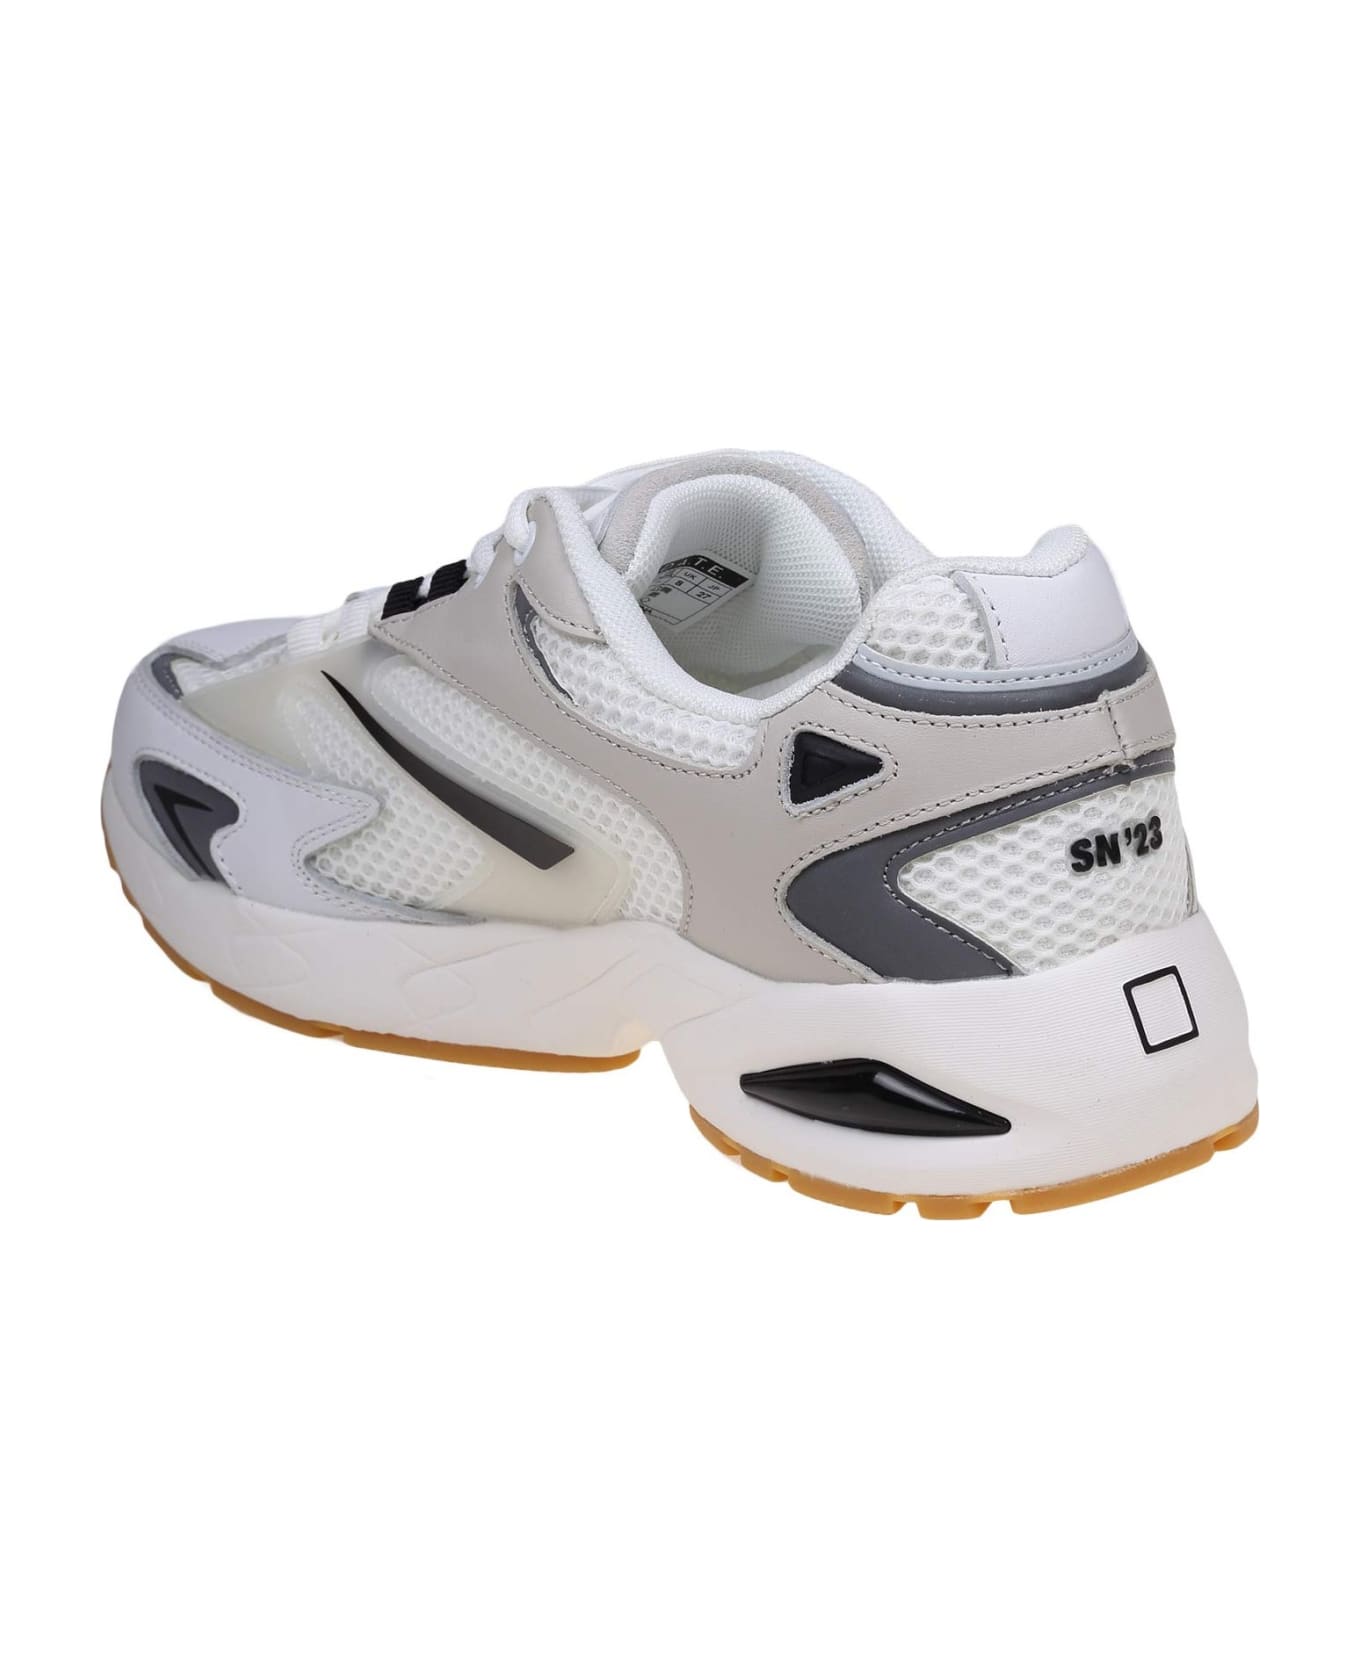 D.A.T.E. Sn23 Sneakers In White/grey Mesh And Leather - White/Grey スニーカー